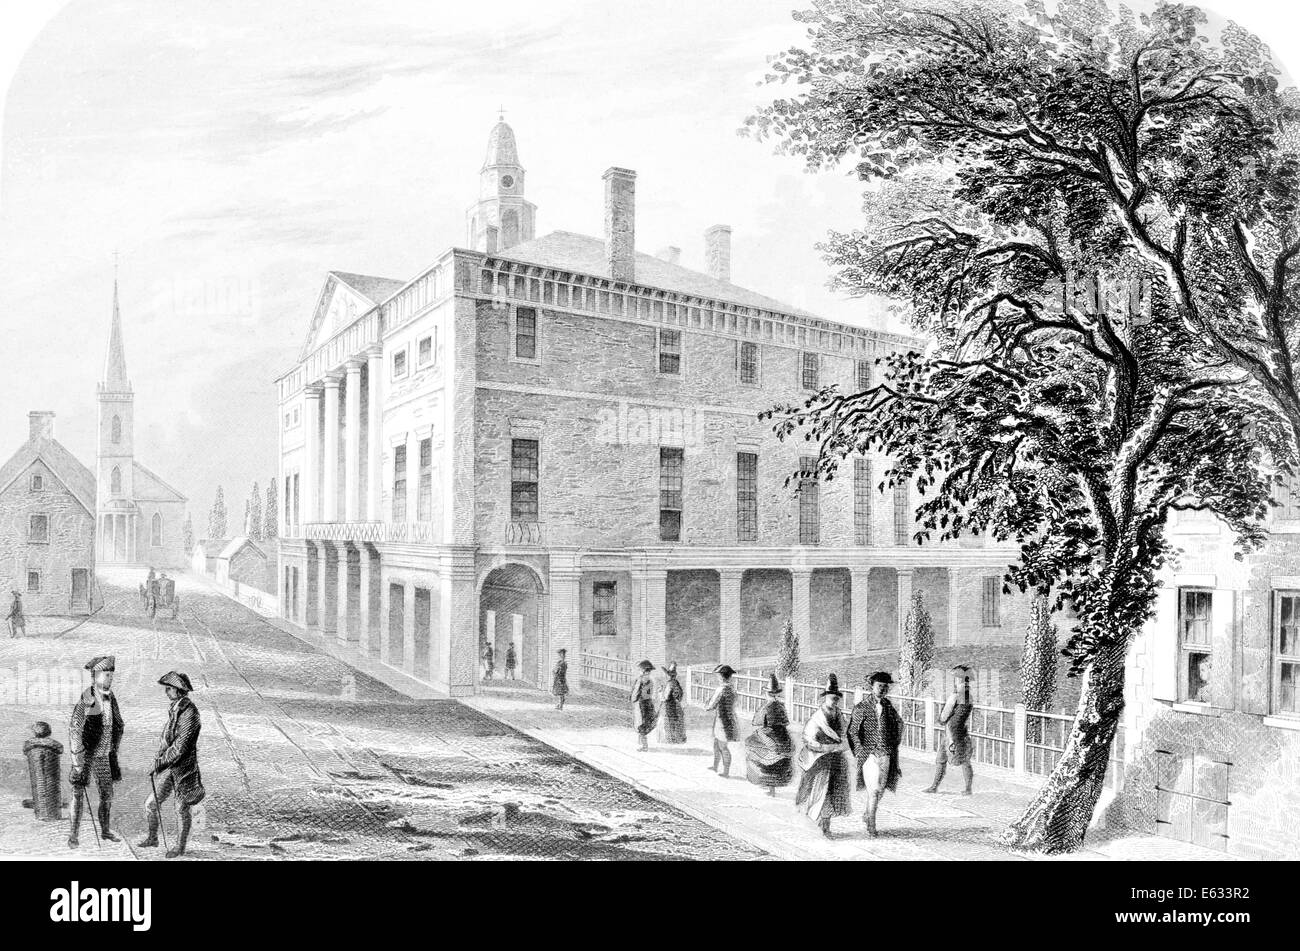 1700s 1790s WALL STREET NEW YORK CITY TRINITY CHURCH AT END OF STREET FEDERAL HALL & TREE UNDER WHICH STOCK EXCHANGE MET Stock Photo